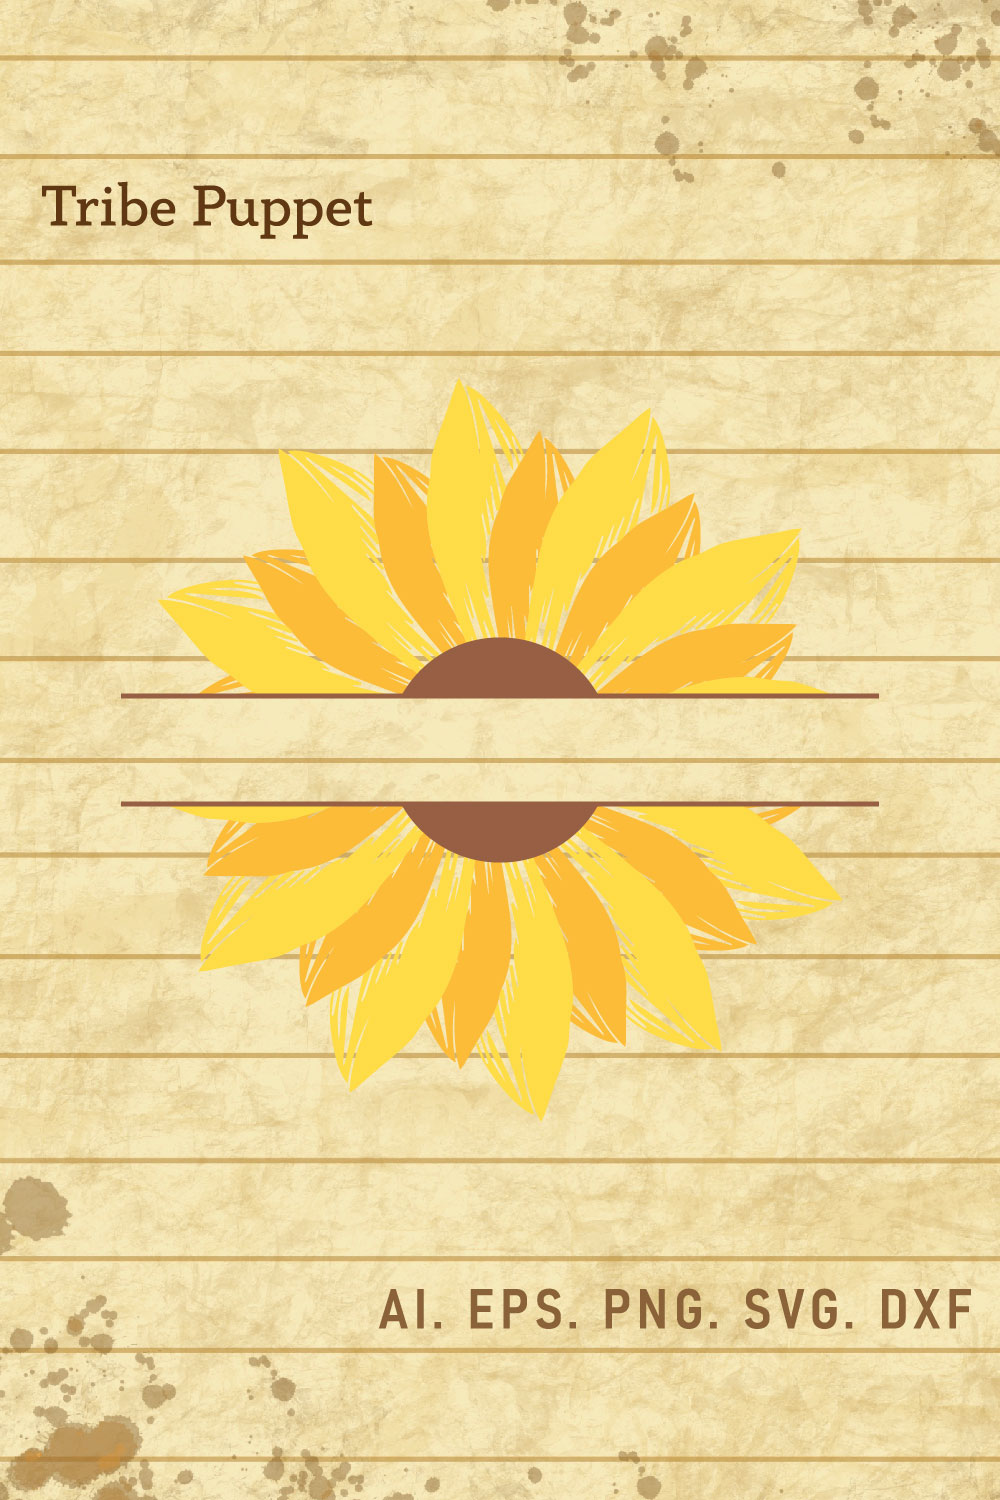 Sunflower 21 pinterest preview image.